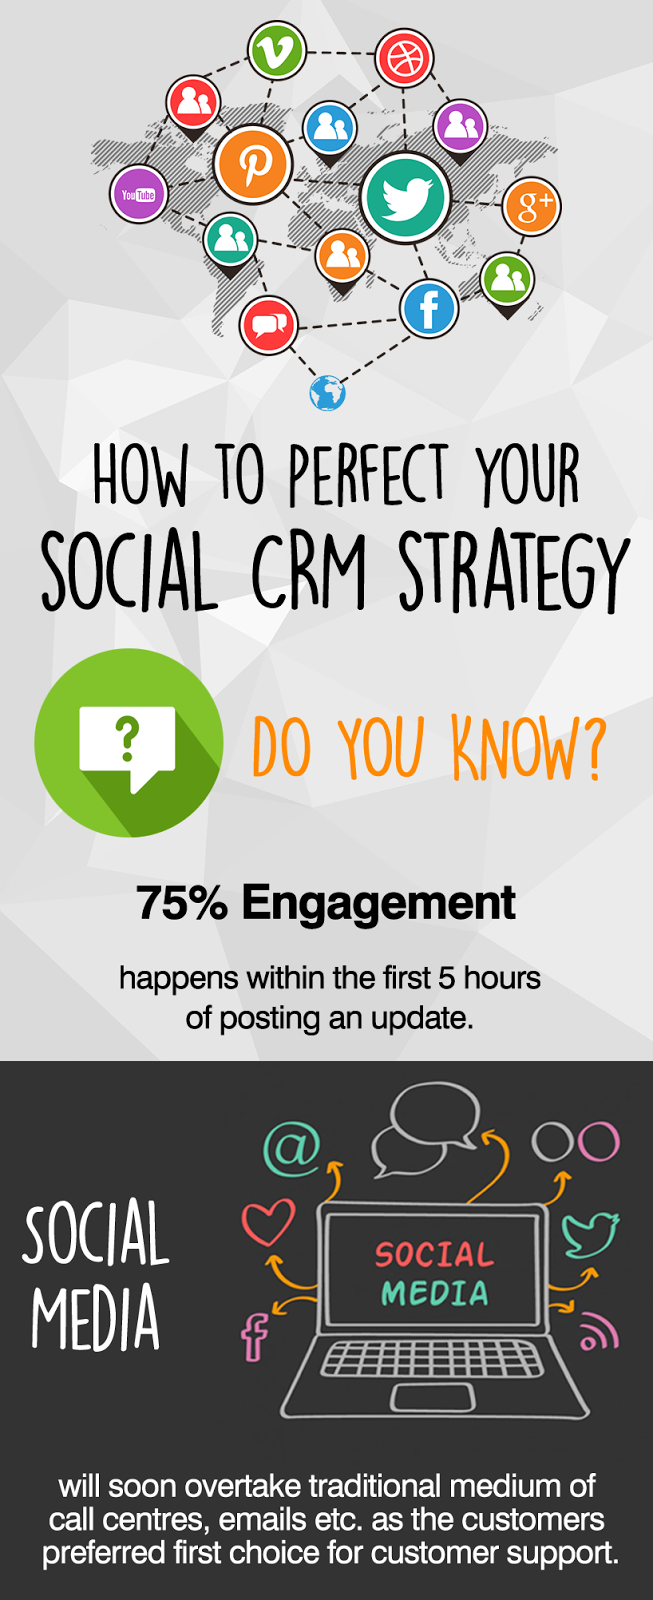 How to Perfect Your Social CRM Strategy?